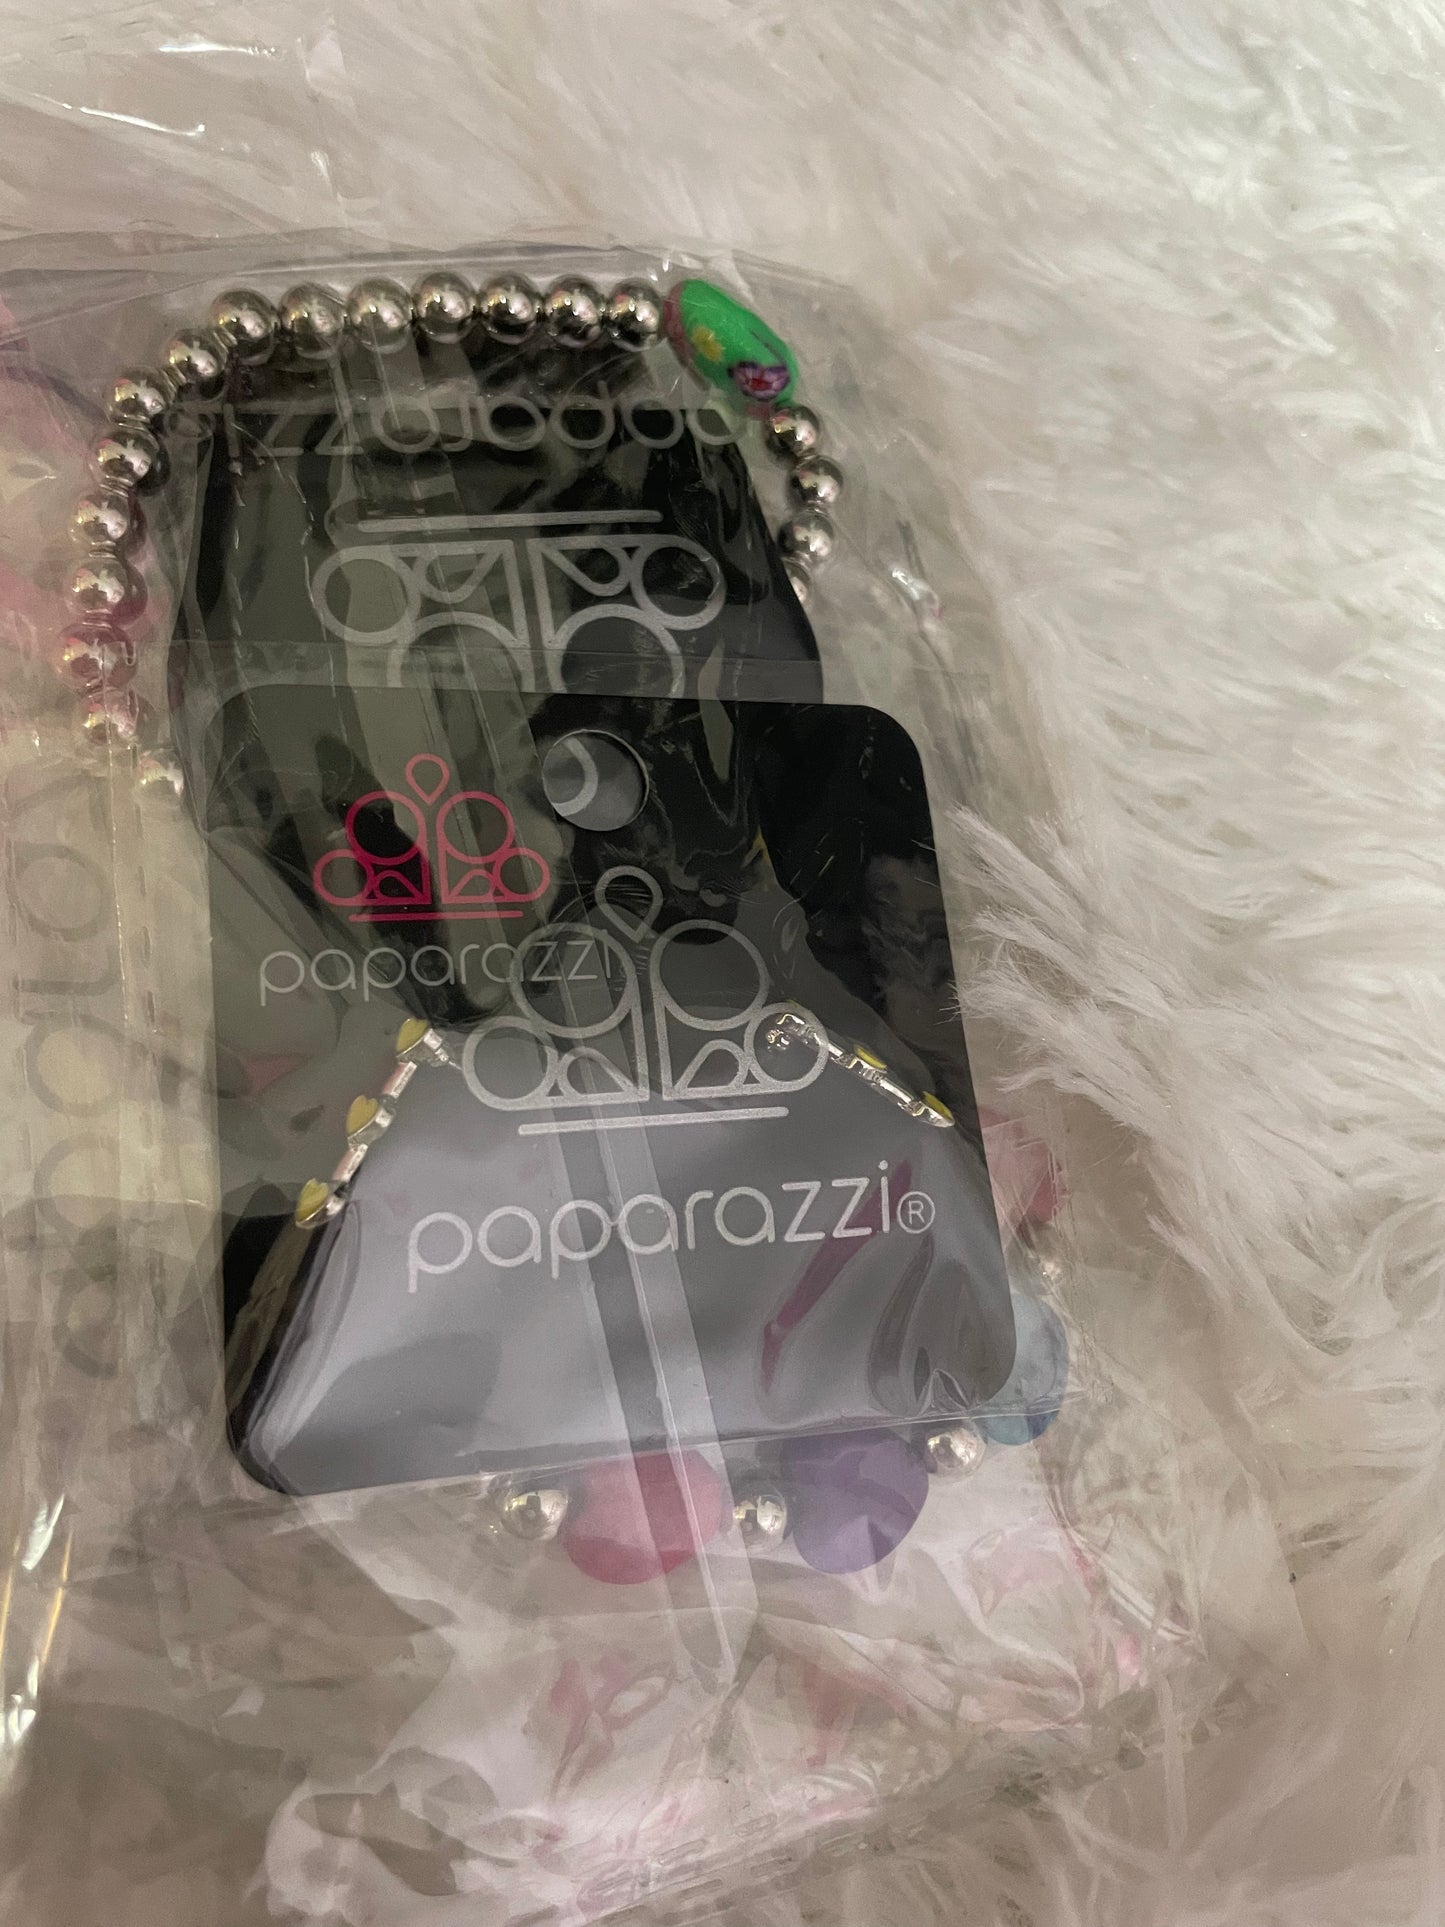 Paparazzi Accessories Starlet Shimmer: Random 5 Pack 5 Pieces of Random Junior $1 accessories Pack contains five (5) different Starlet Shimmer accessories. You will receive a mix of bracelets, rings, and earrings; the pieces you receive may not be picture